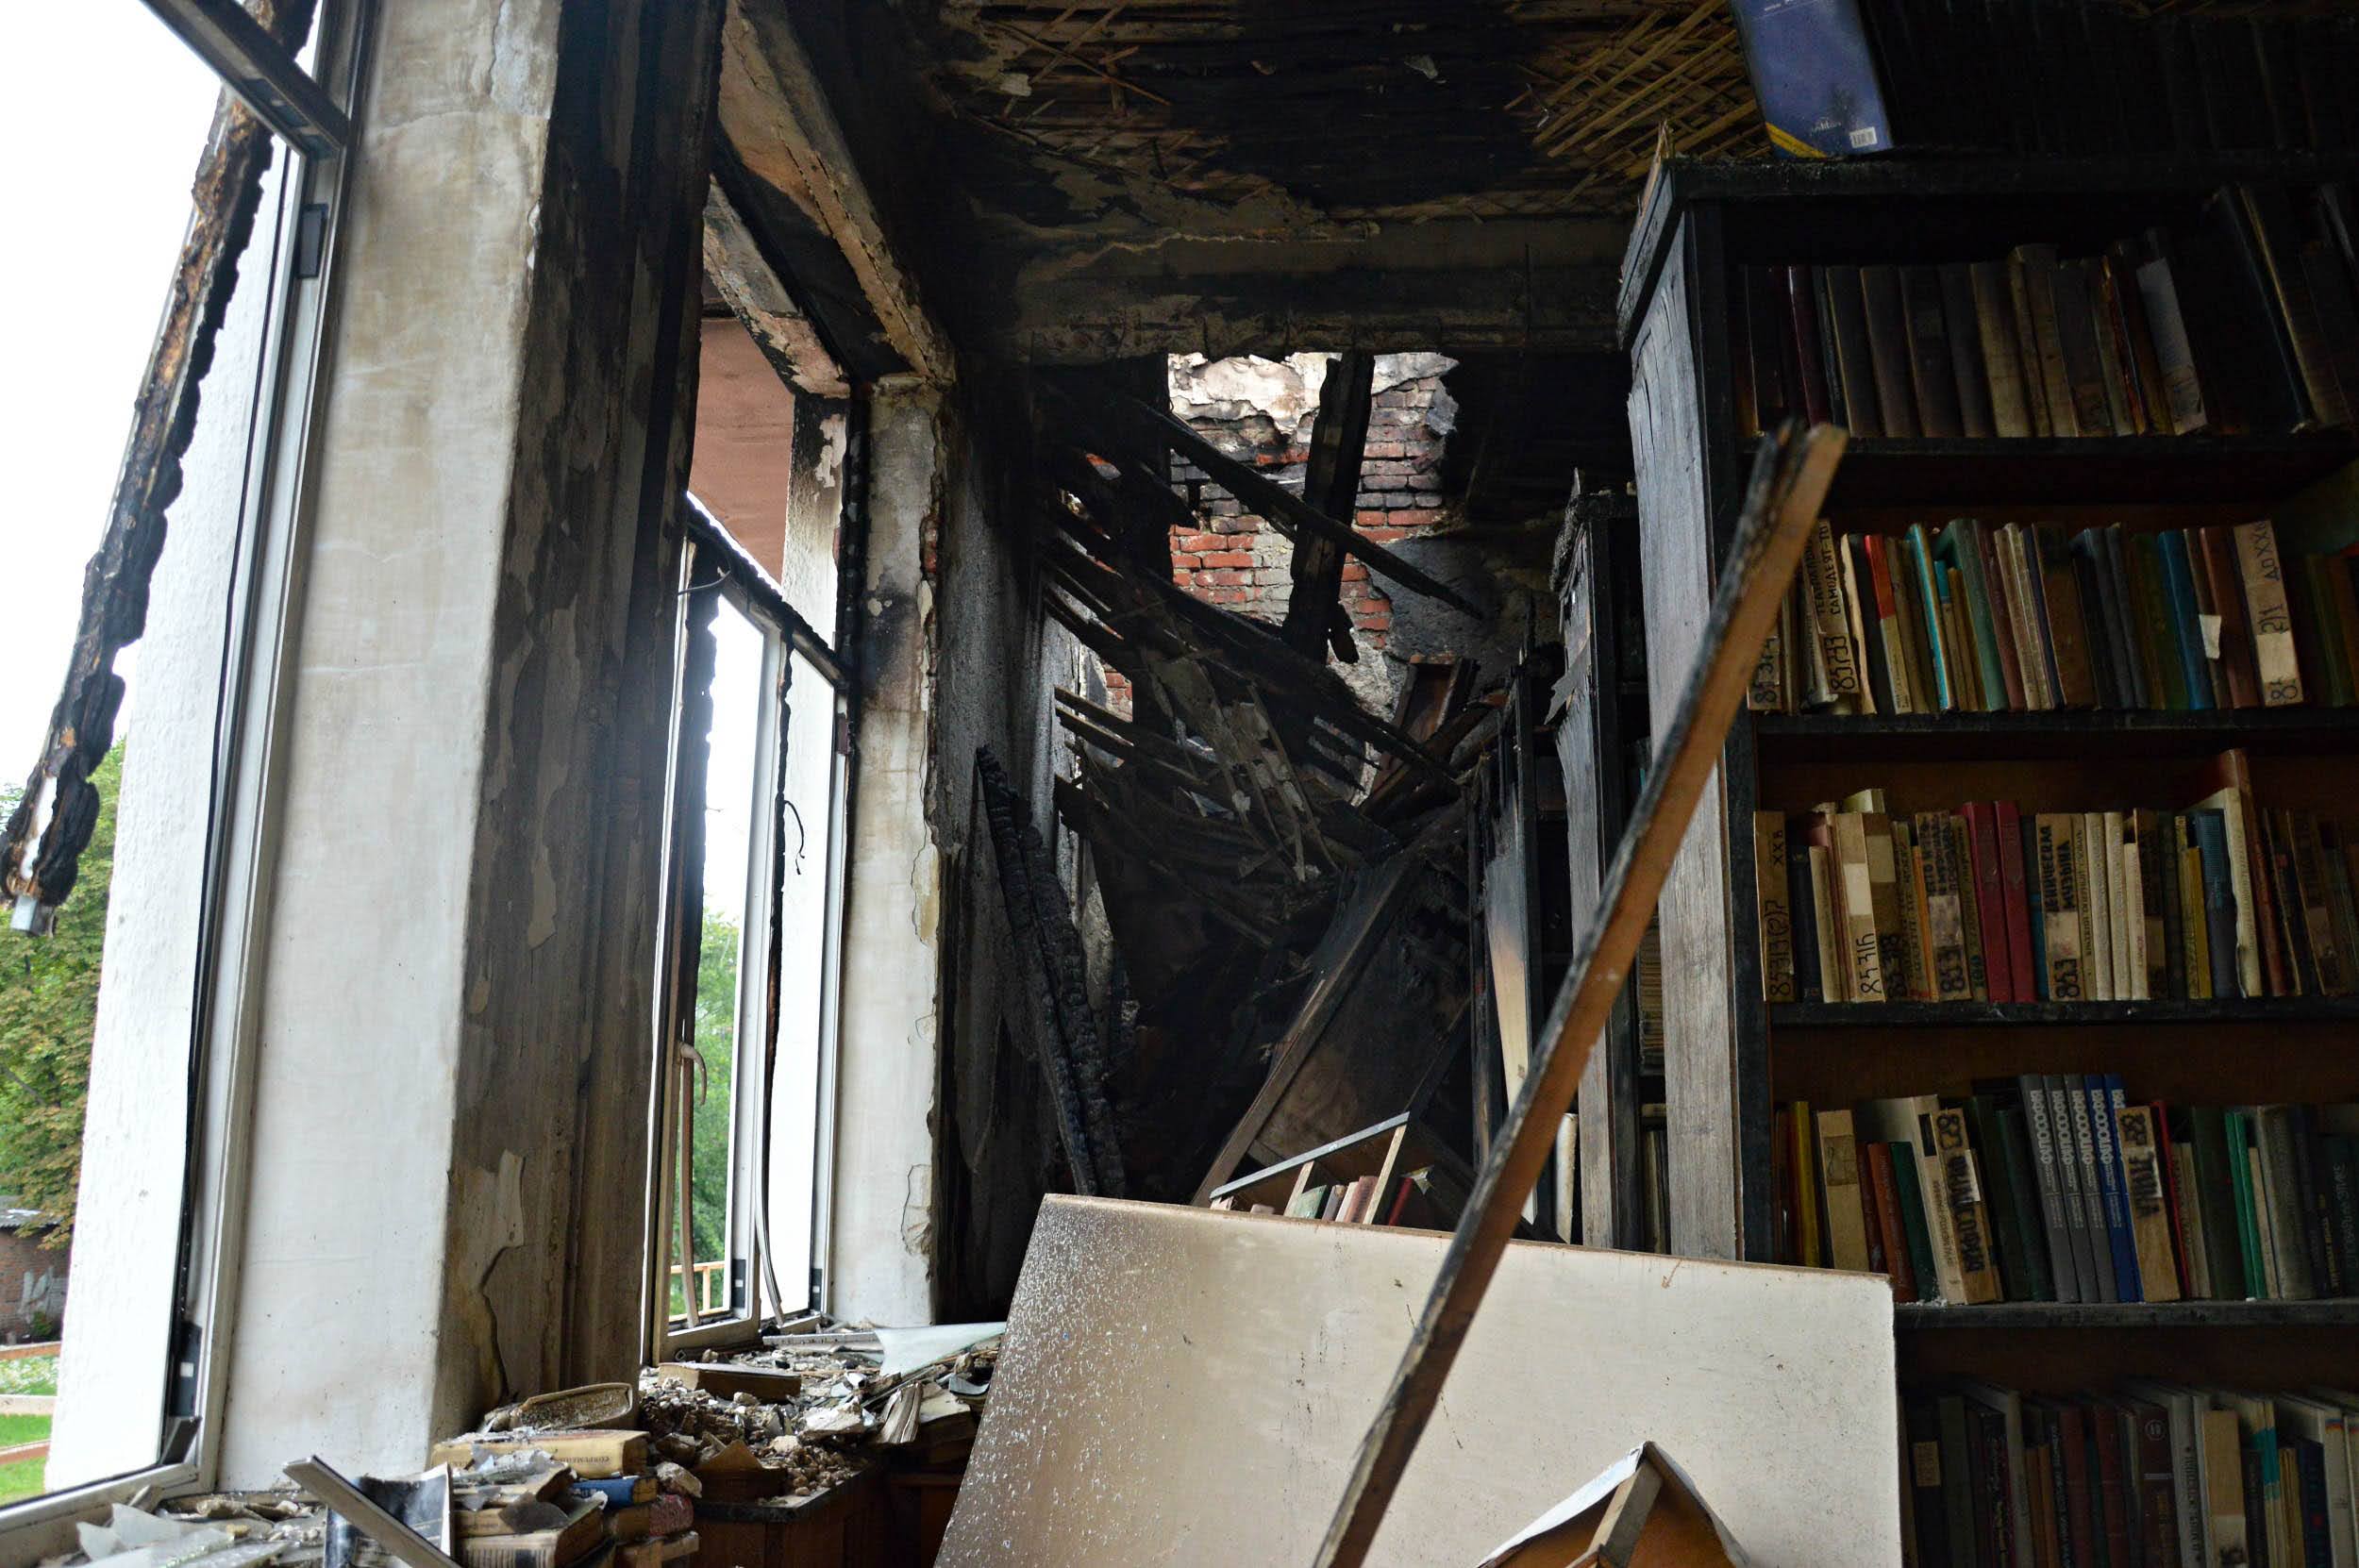 The Kharkiv Higher Vocational School No. 6 was severely damaged as a result of the Russian attack. This is the destroyed and burnt library of the school. Photo was taken on Aug 02, 2022 by Yuliia Hush.